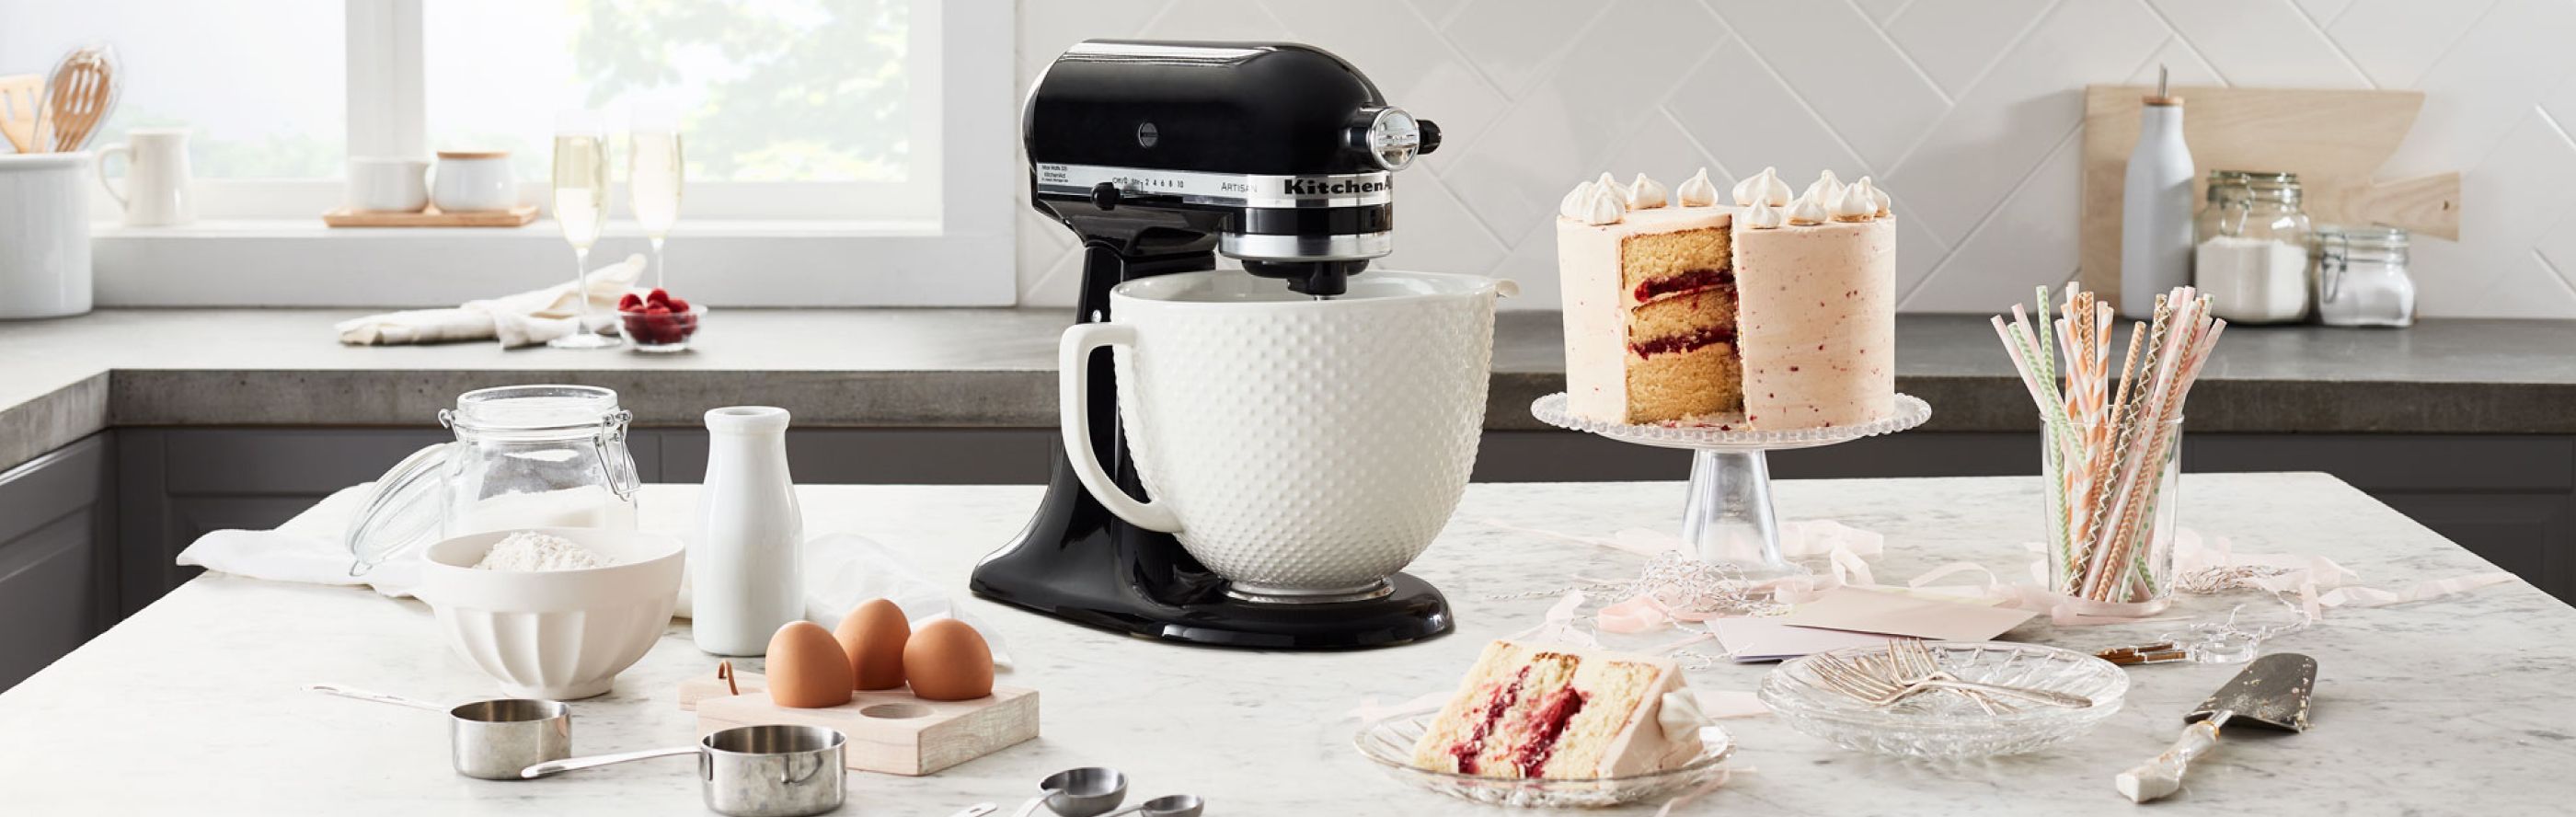 Black KitchenAid® stand mixer on counter with baking ingredients